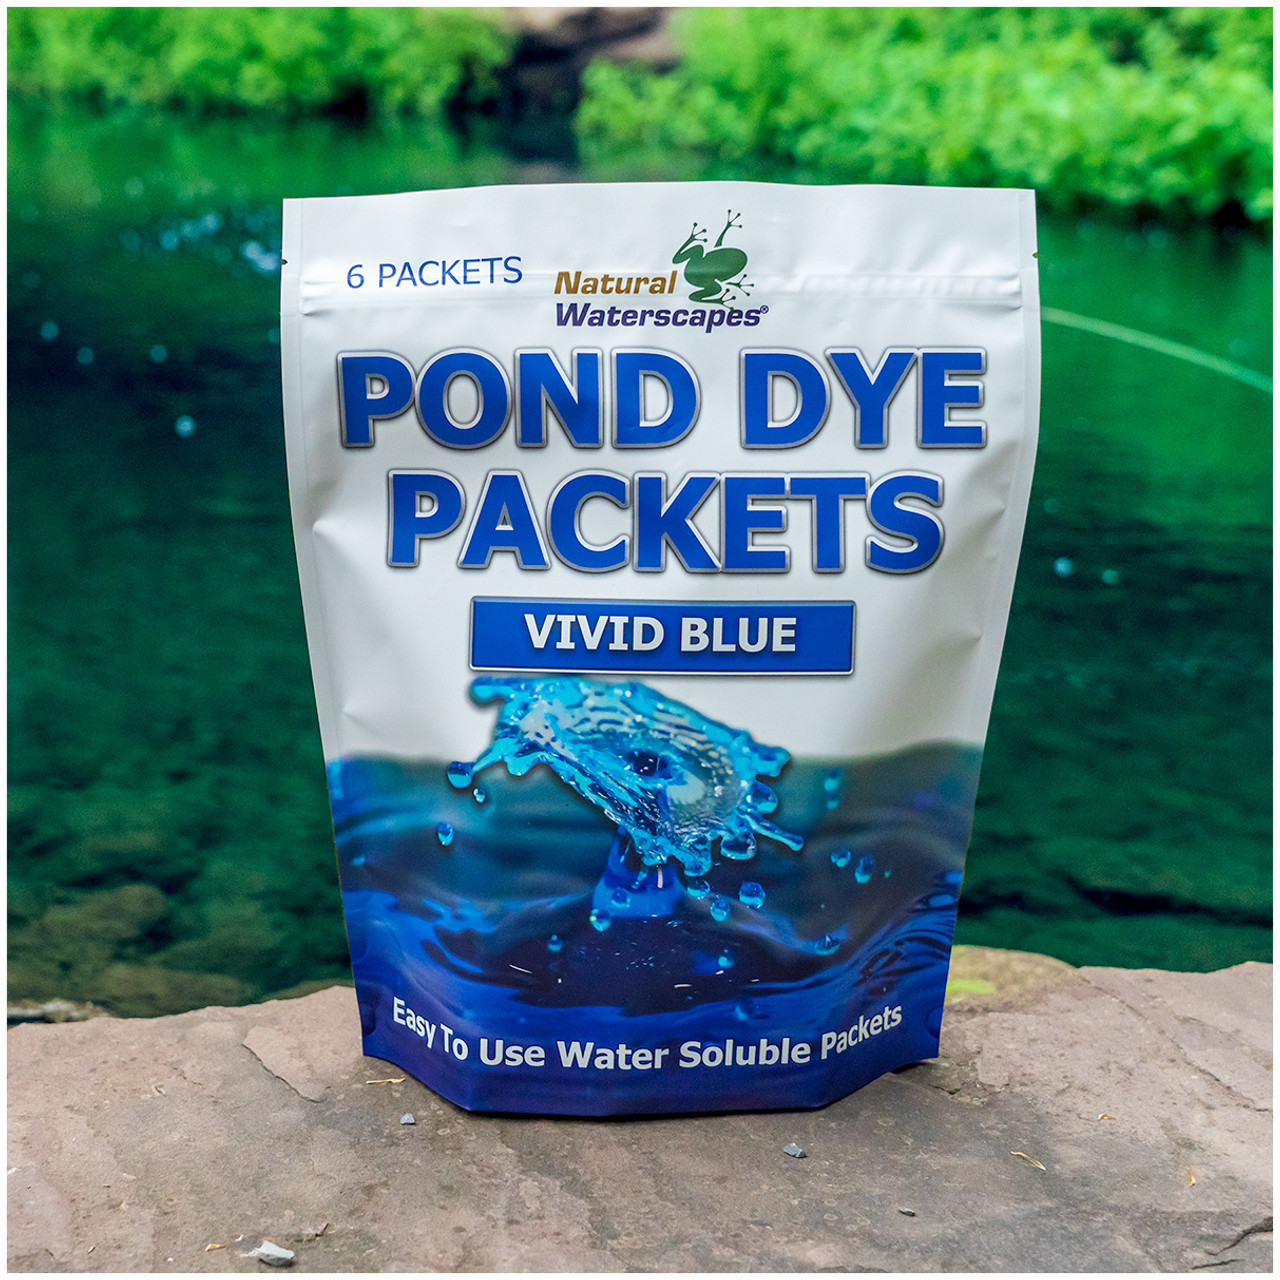 Lakes and Ponds TrueBlue Pond & Lake Dye Packets